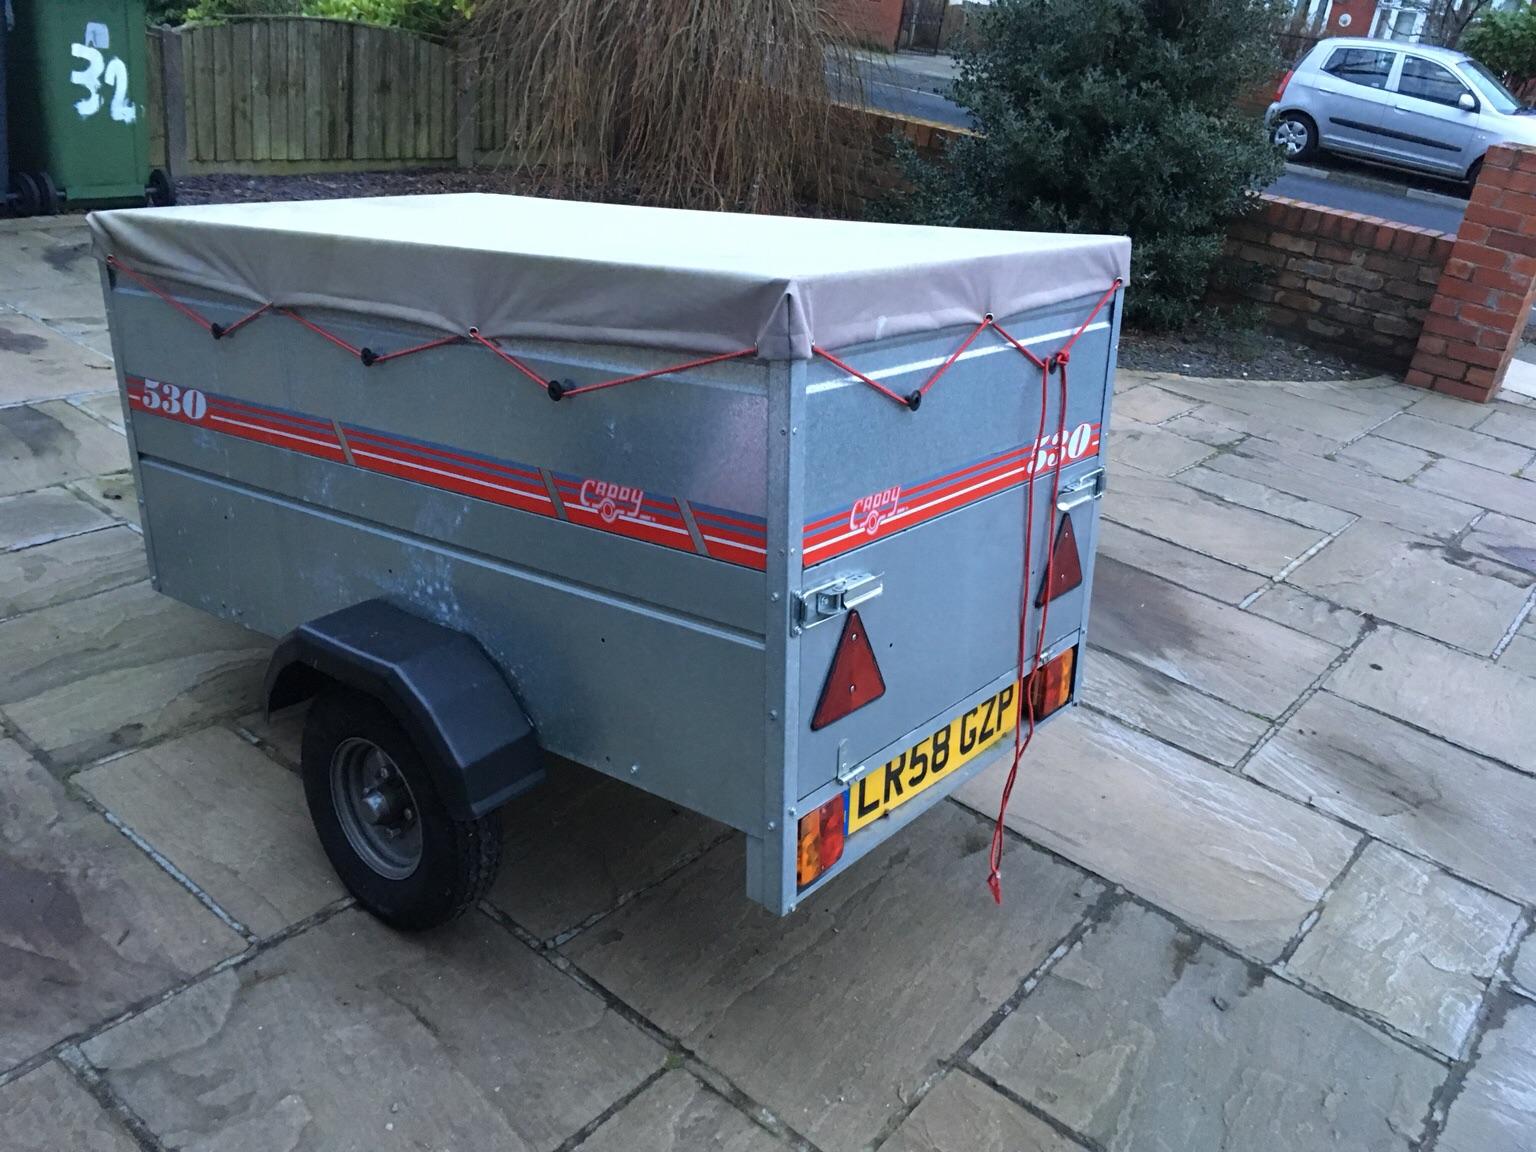 Caddy 530 trailer with high sides in L30 Sefton for £350.00 for sale